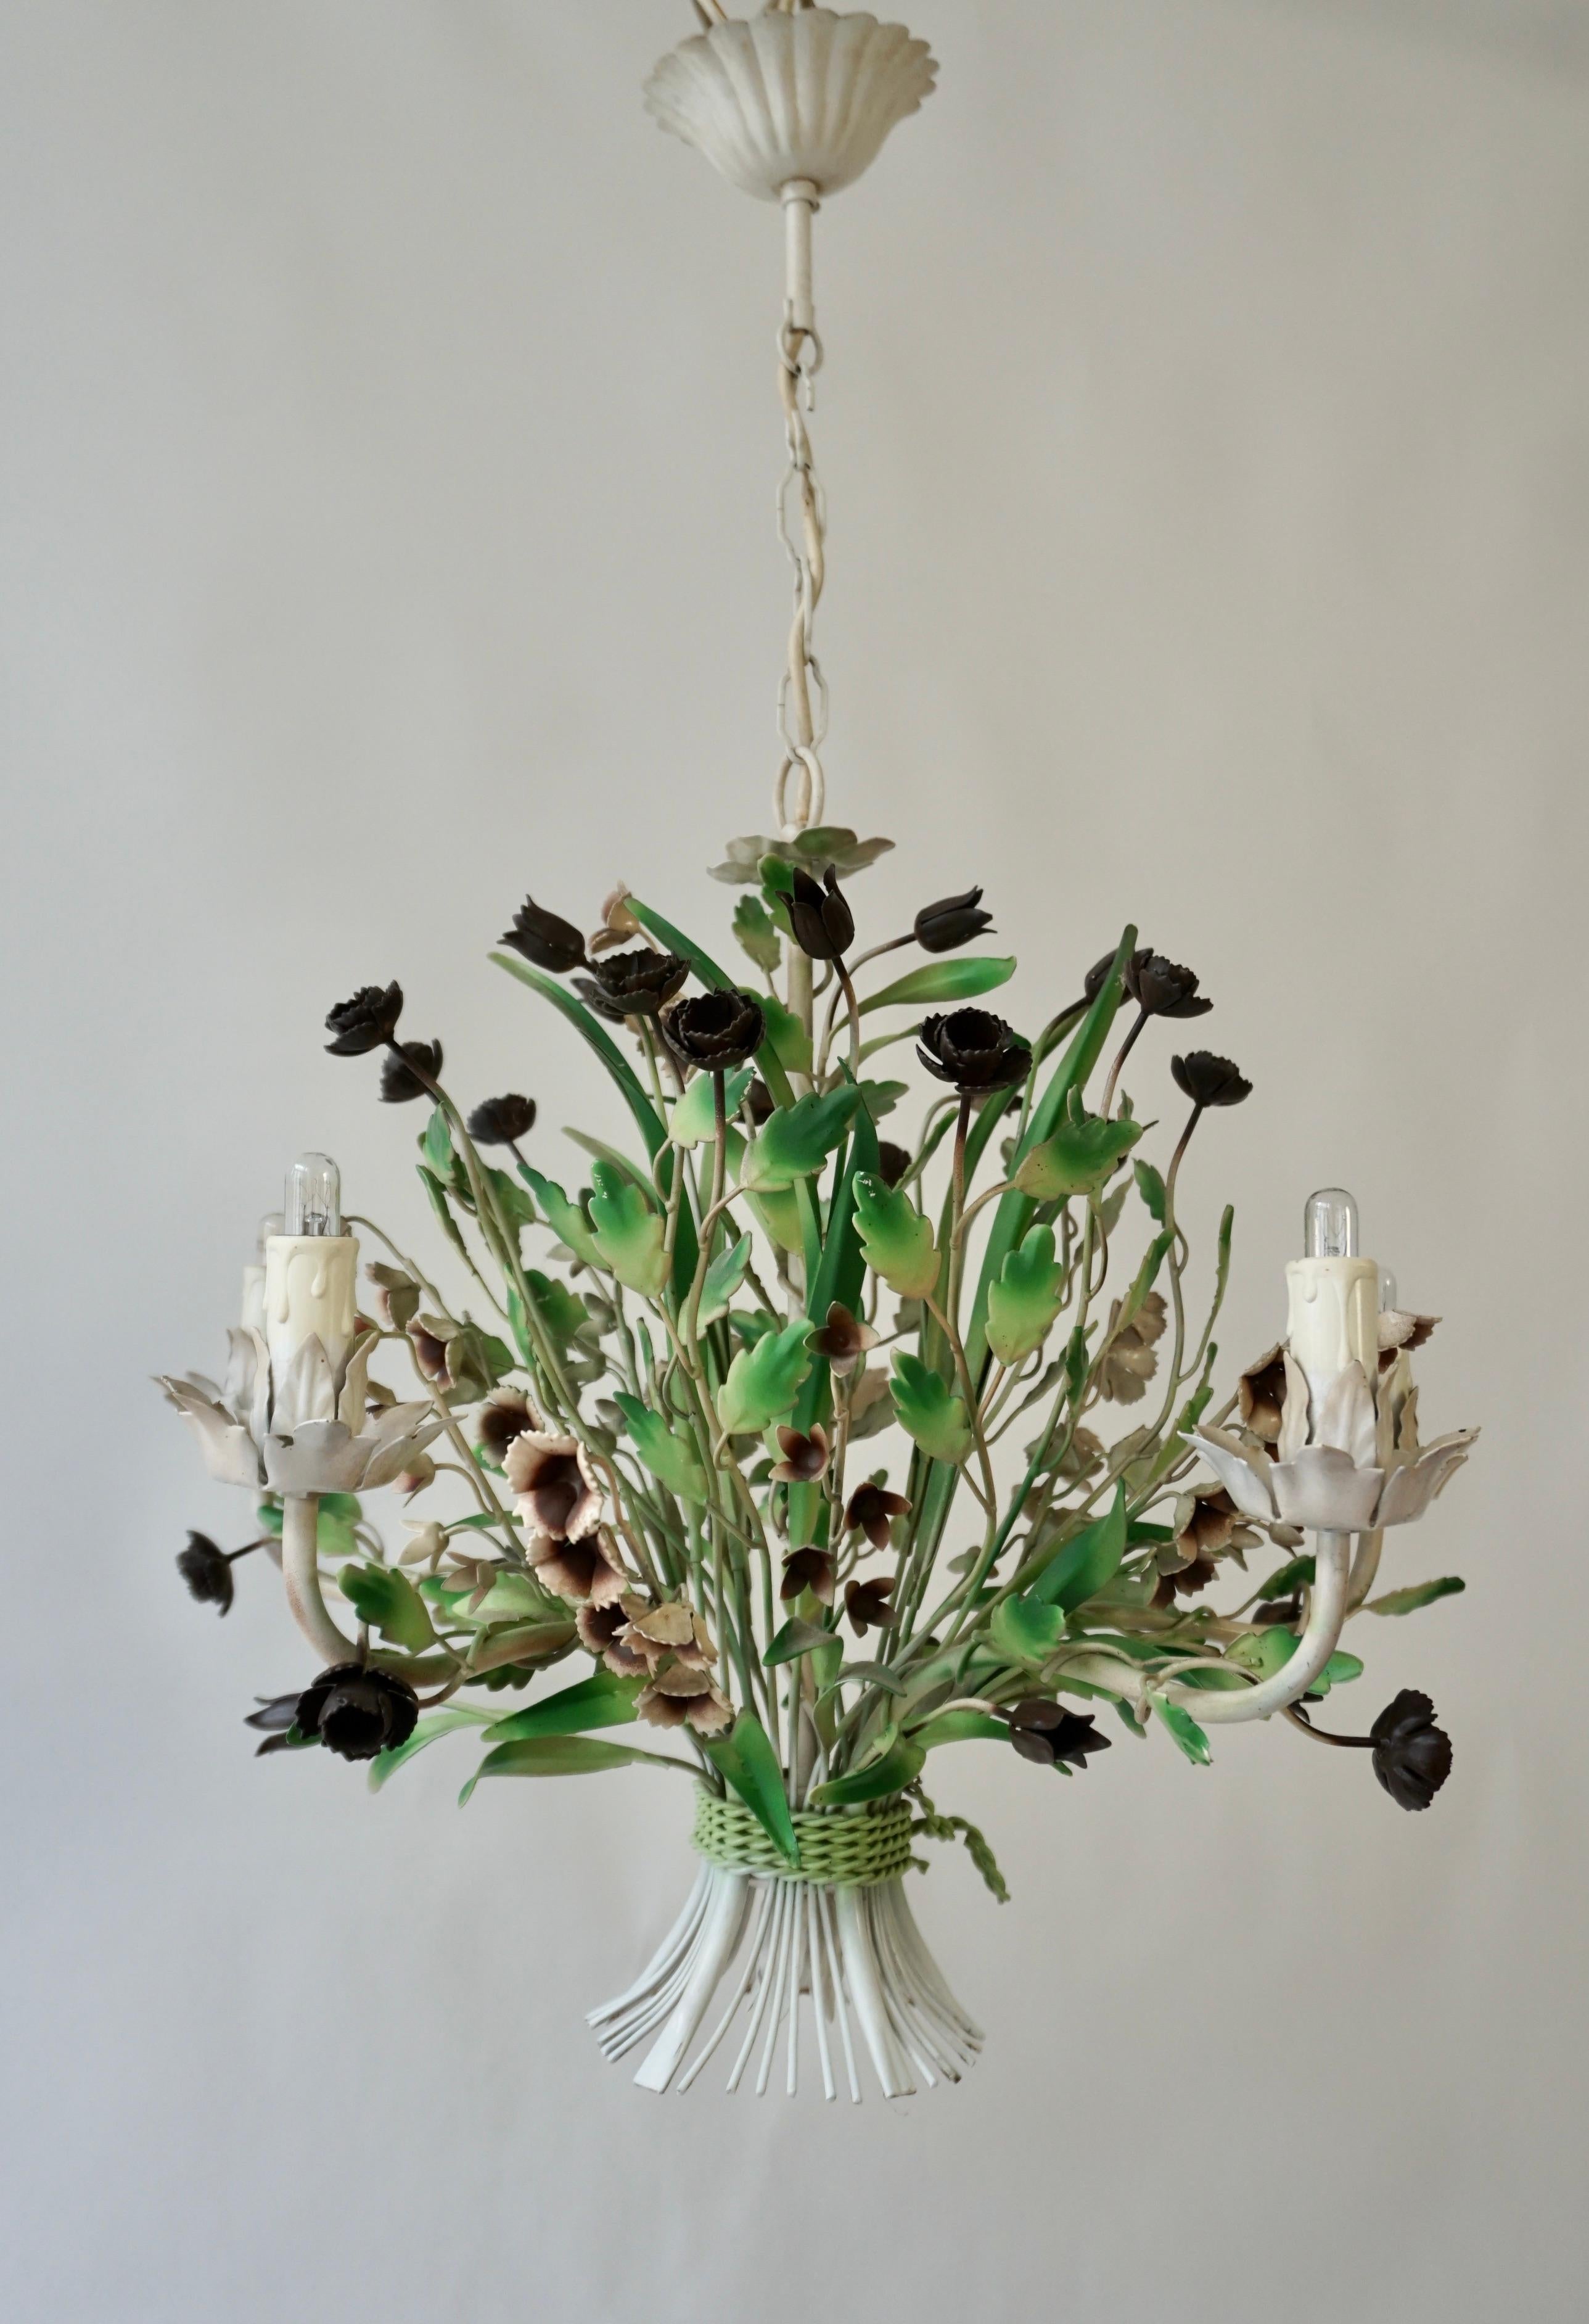 A vintage tole five-light chandelier with flower and leaf accents. Original paint finish in vibrant greens, white, and different shades of brown.

Diameter 21.6